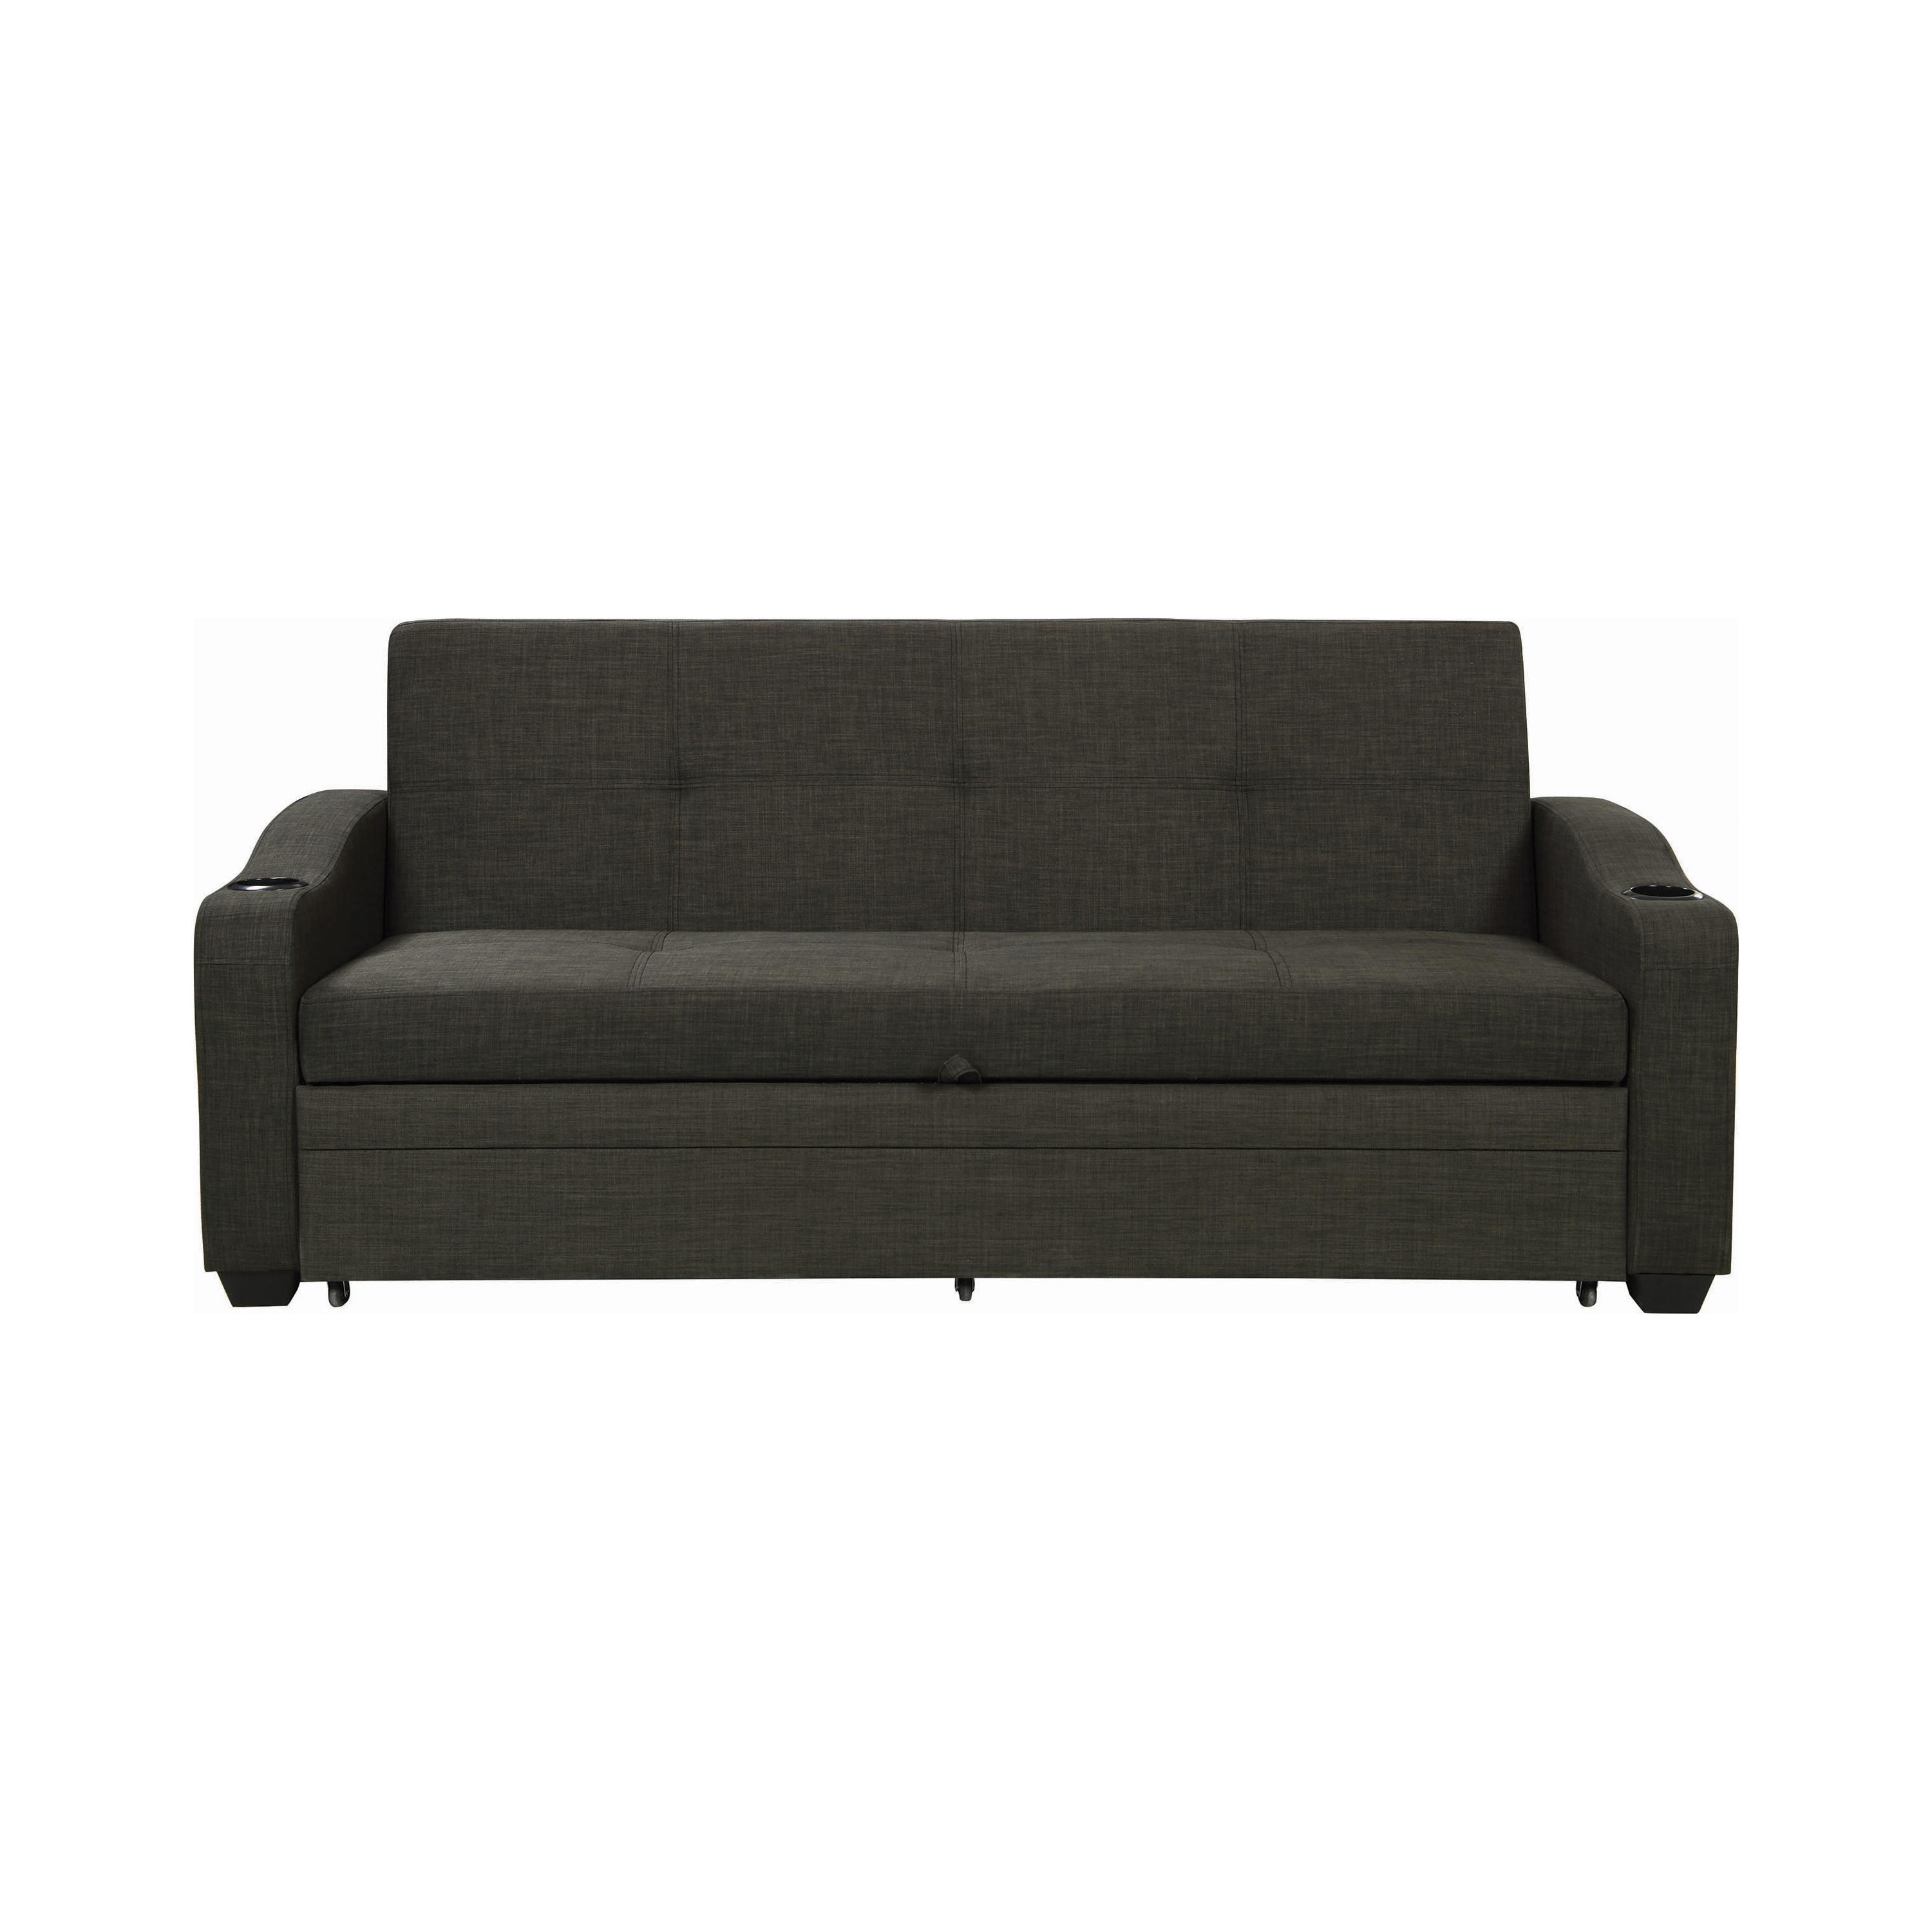 Modern Sofa bed 360063 Miller 360063 in Gray Fabric